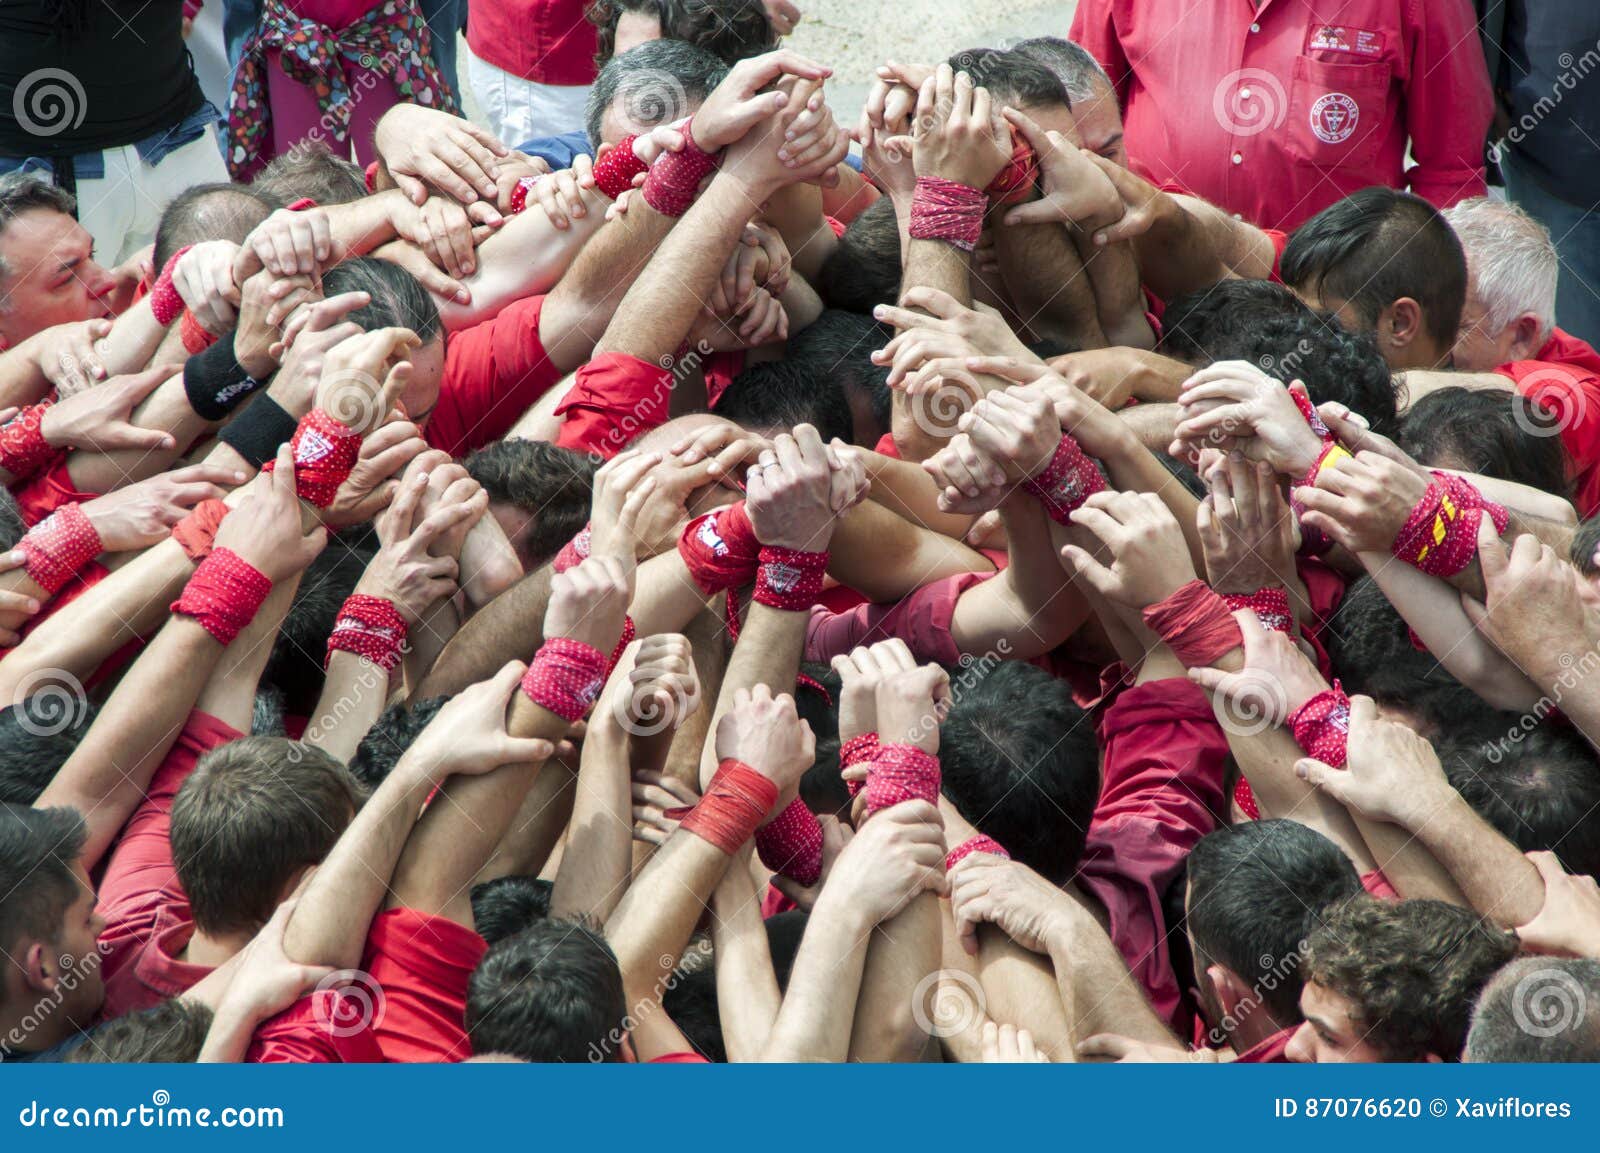 Building Castells or Human Towers Editorial Image of succes, effort: 87076620